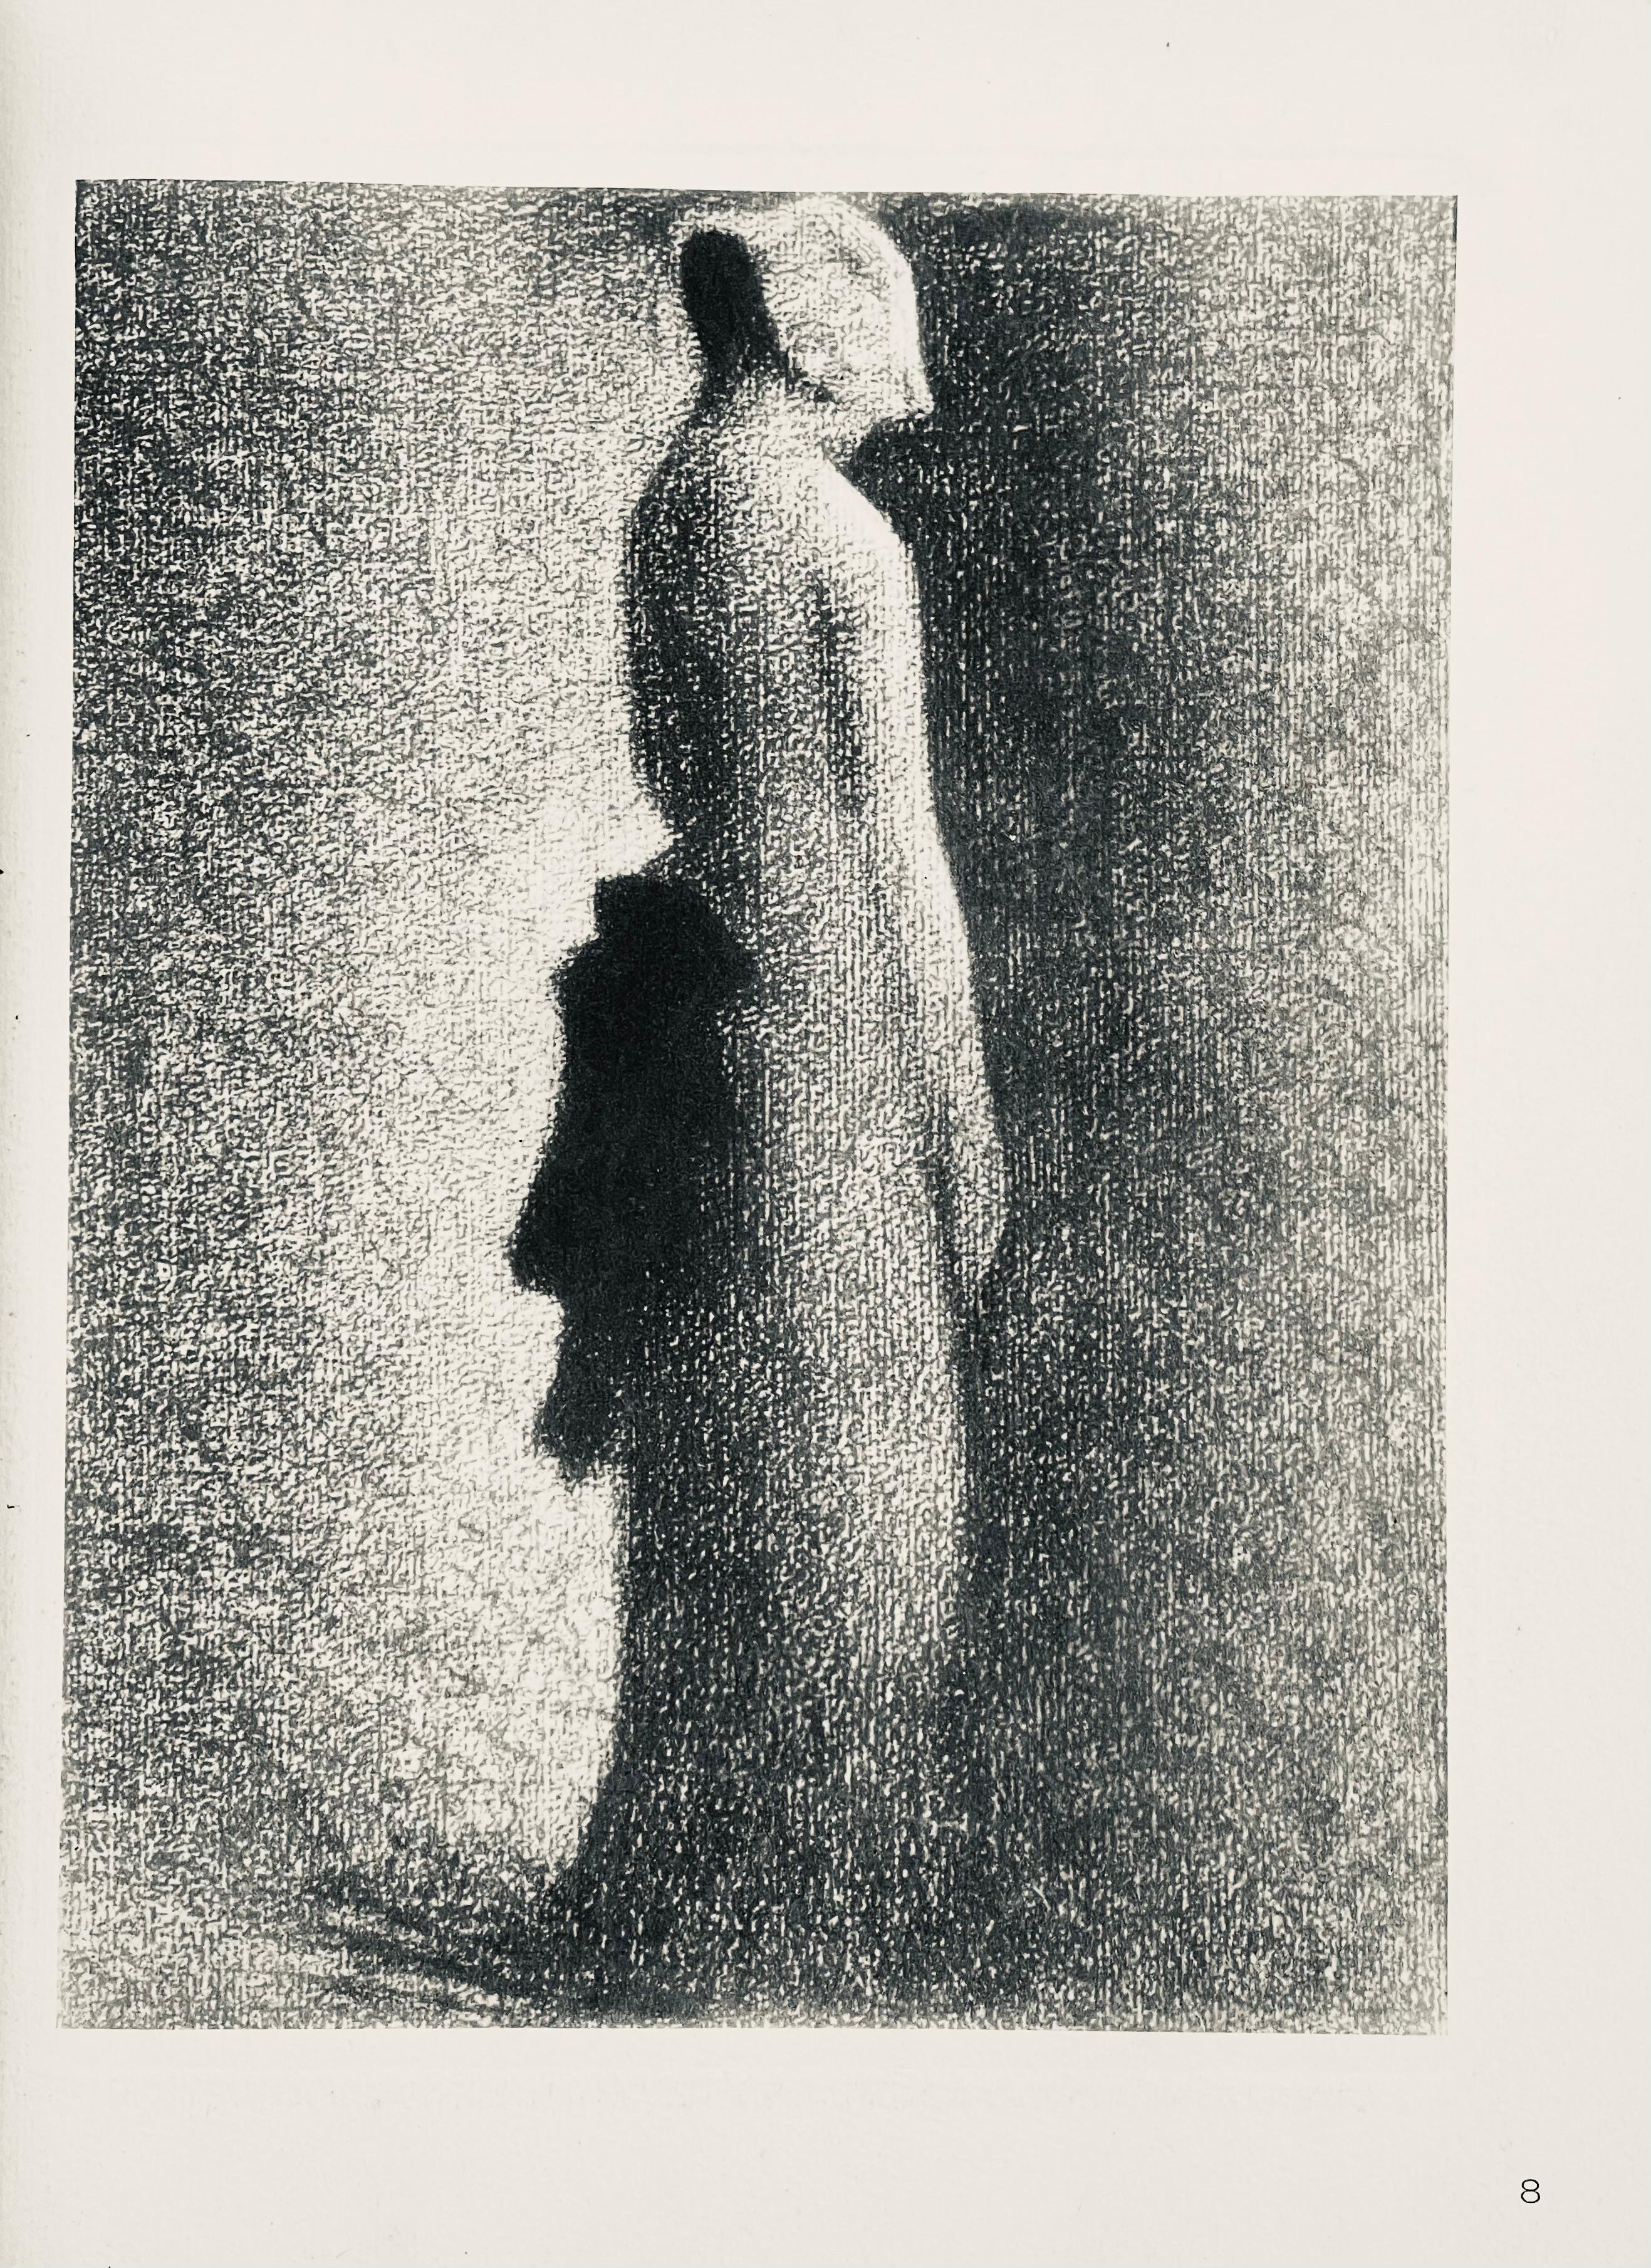 Lithograph on vélin du Canson & Montgolfier Vidalon-Les-Annonay paper. Inscription: unsigned and unnumbered, as issued. Good condition. Notes: From the volume, Seurat, 1948. Published by George Besson, Paris; printed by Les Éditions Braun & Cie,